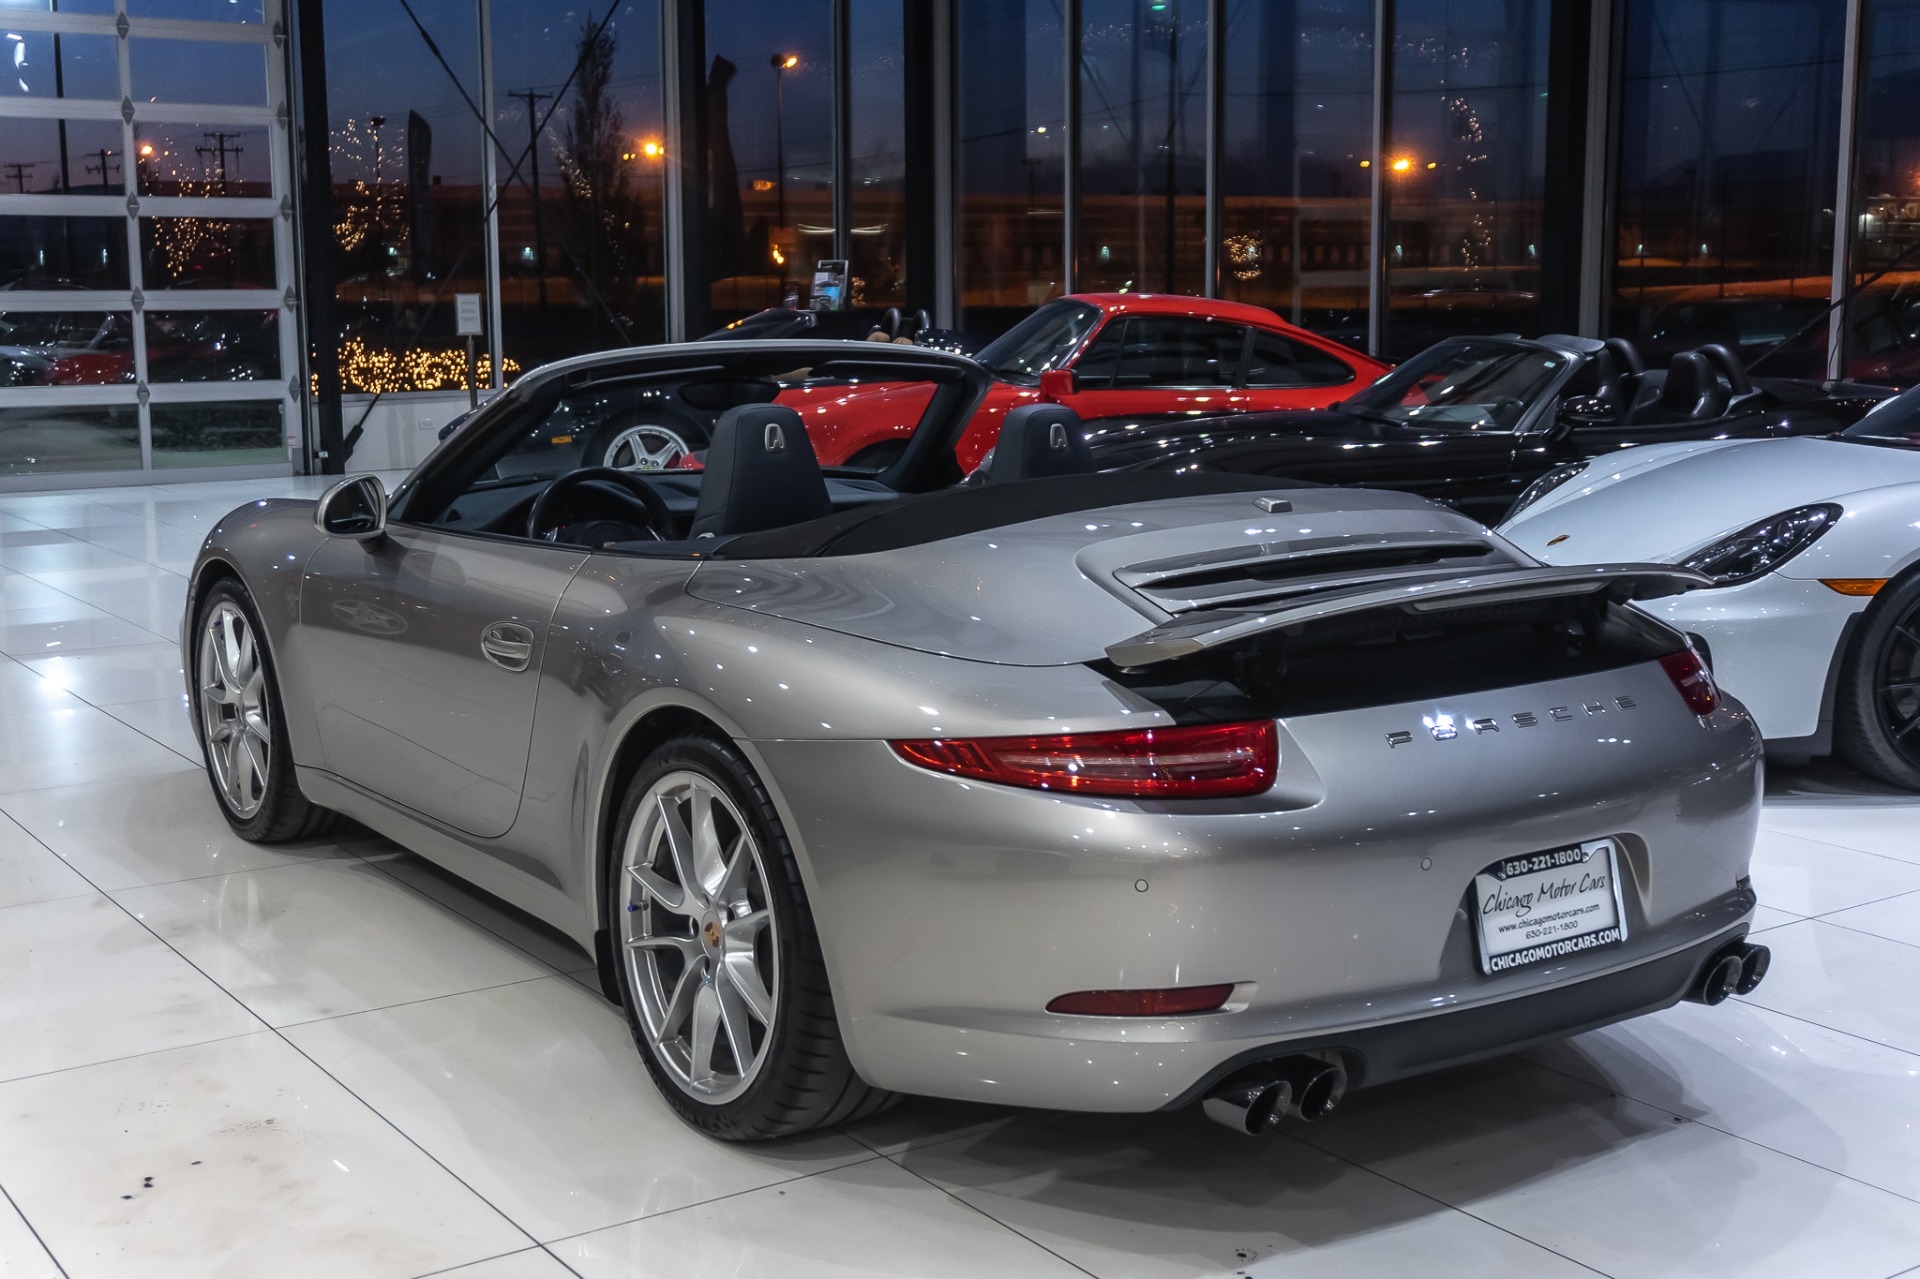 Used-2013-Porsche-911-Carrera-Cabriolet-MSRP-109k-BOSE-FAB-SPEED-EXHAUST